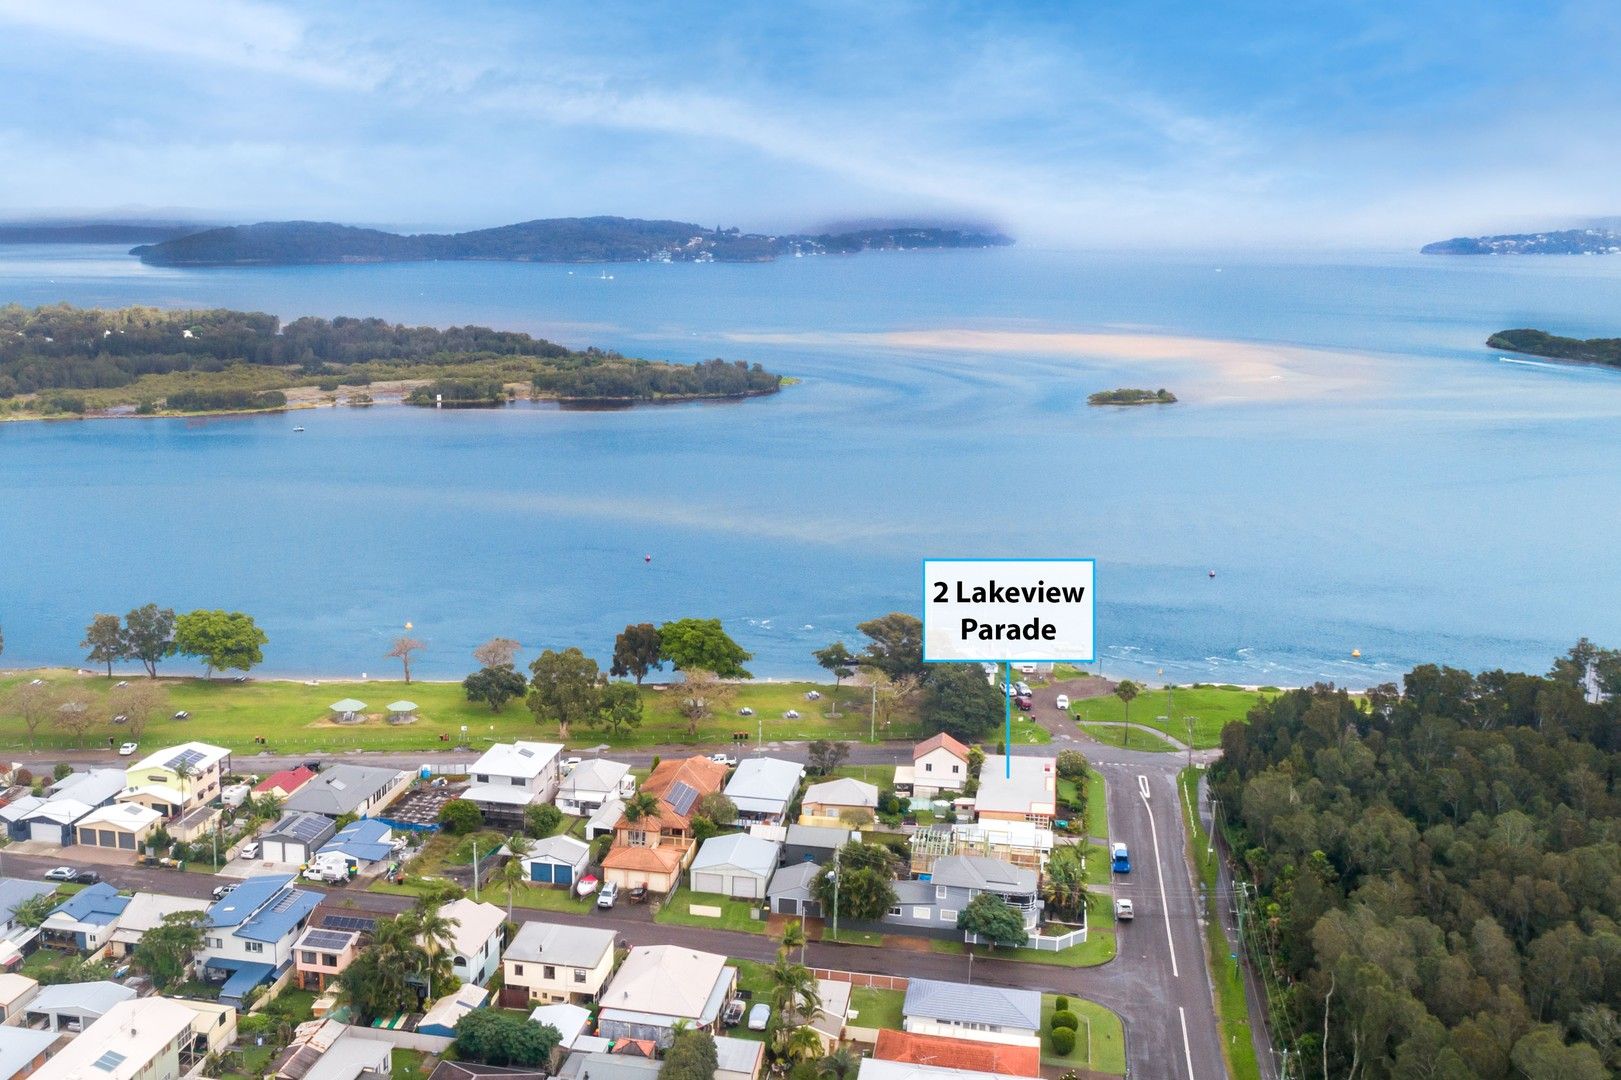 2 Lakeview Parade, Pelican NSW 2281, Image 0